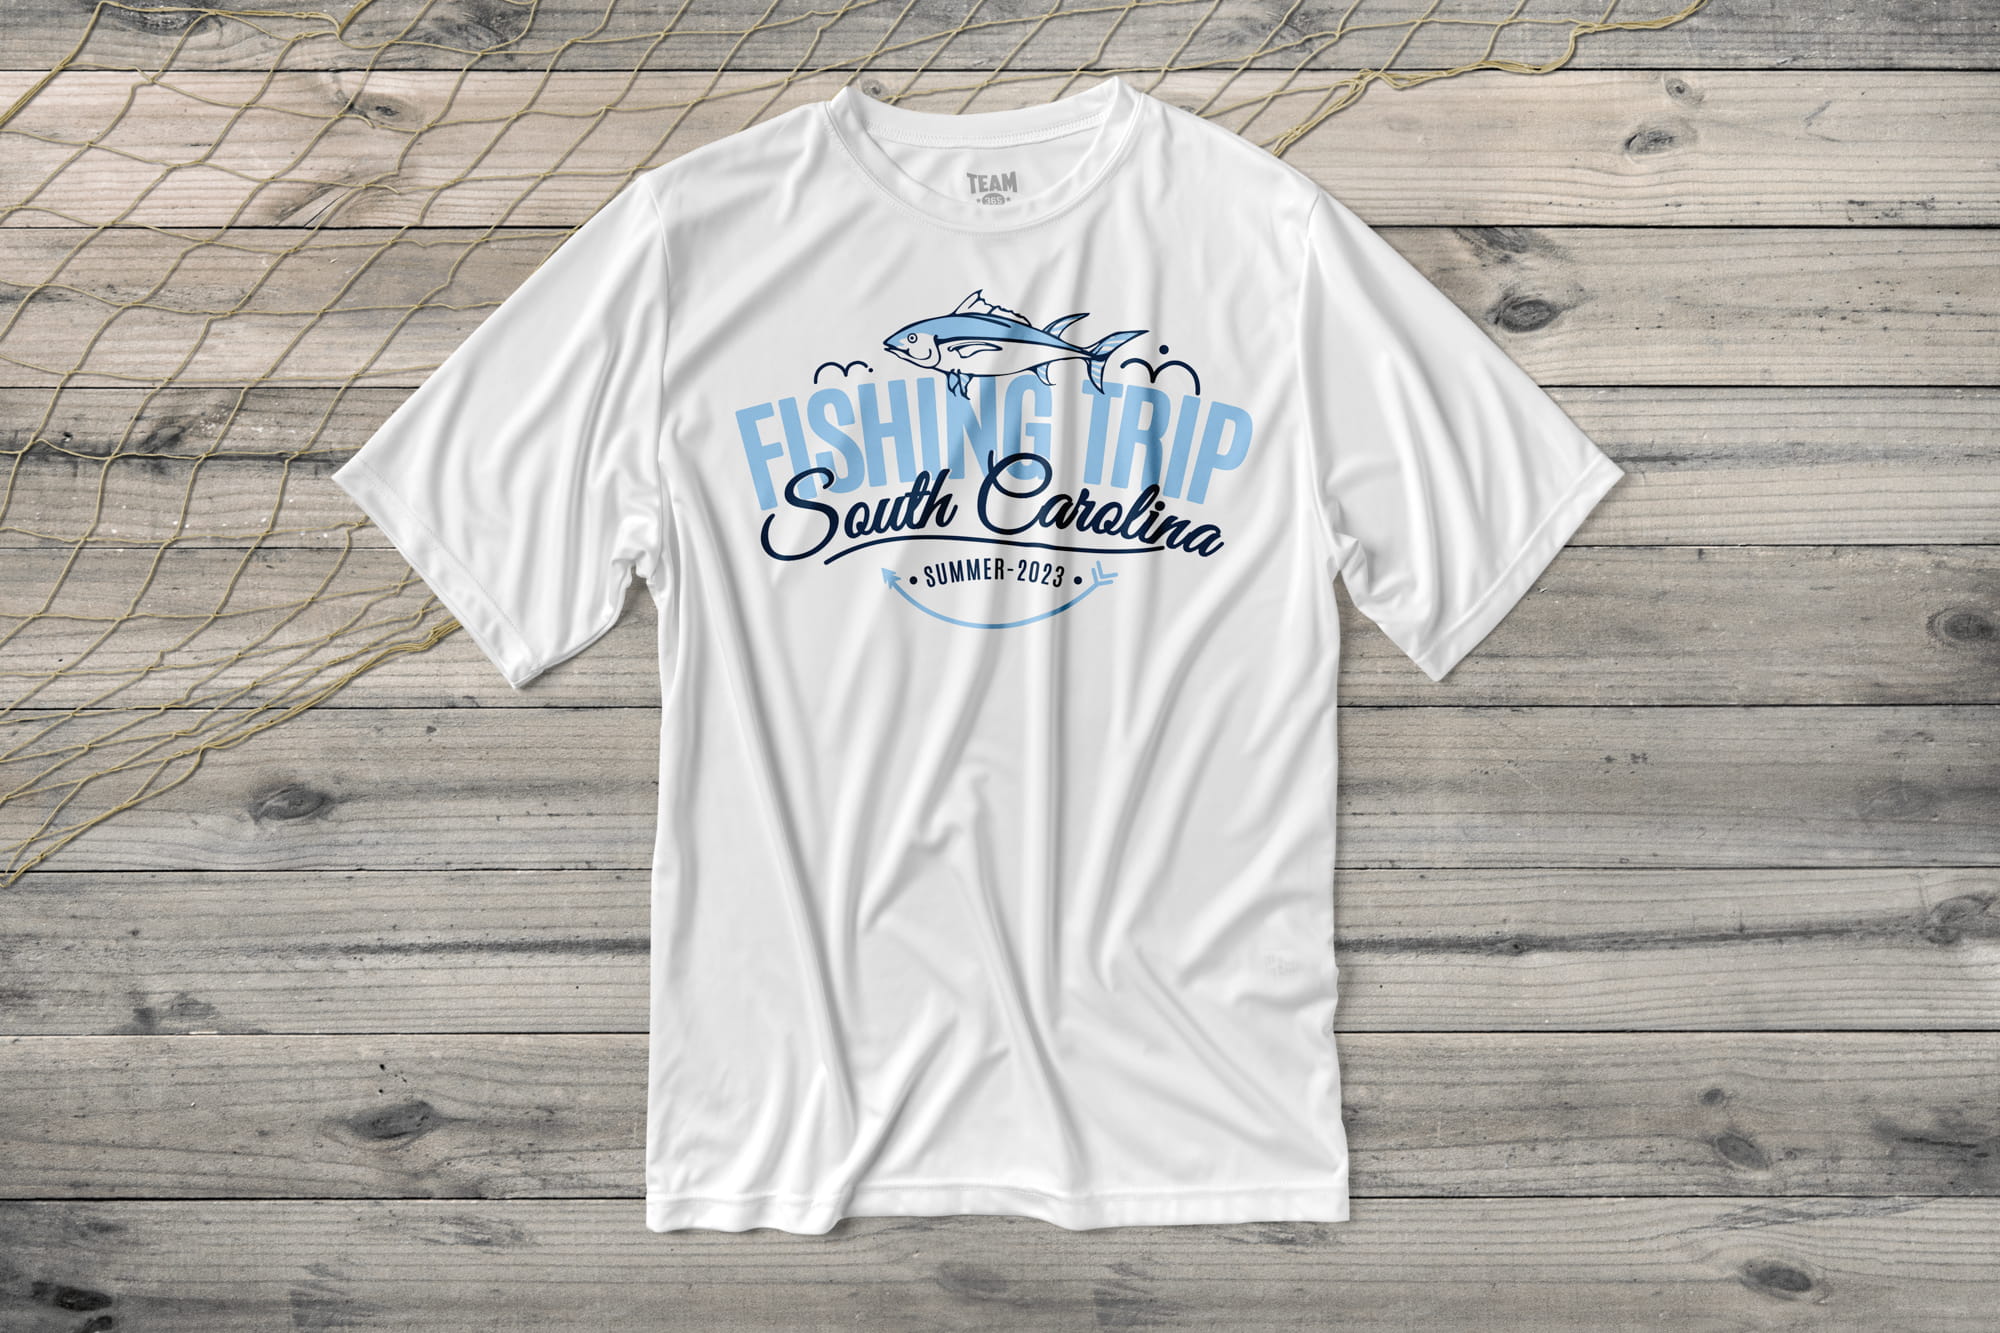 Custom performance t-shirt with a fishing themed template on the shirt. It says "Fishing Trip. South Carolina. Summer, 2023